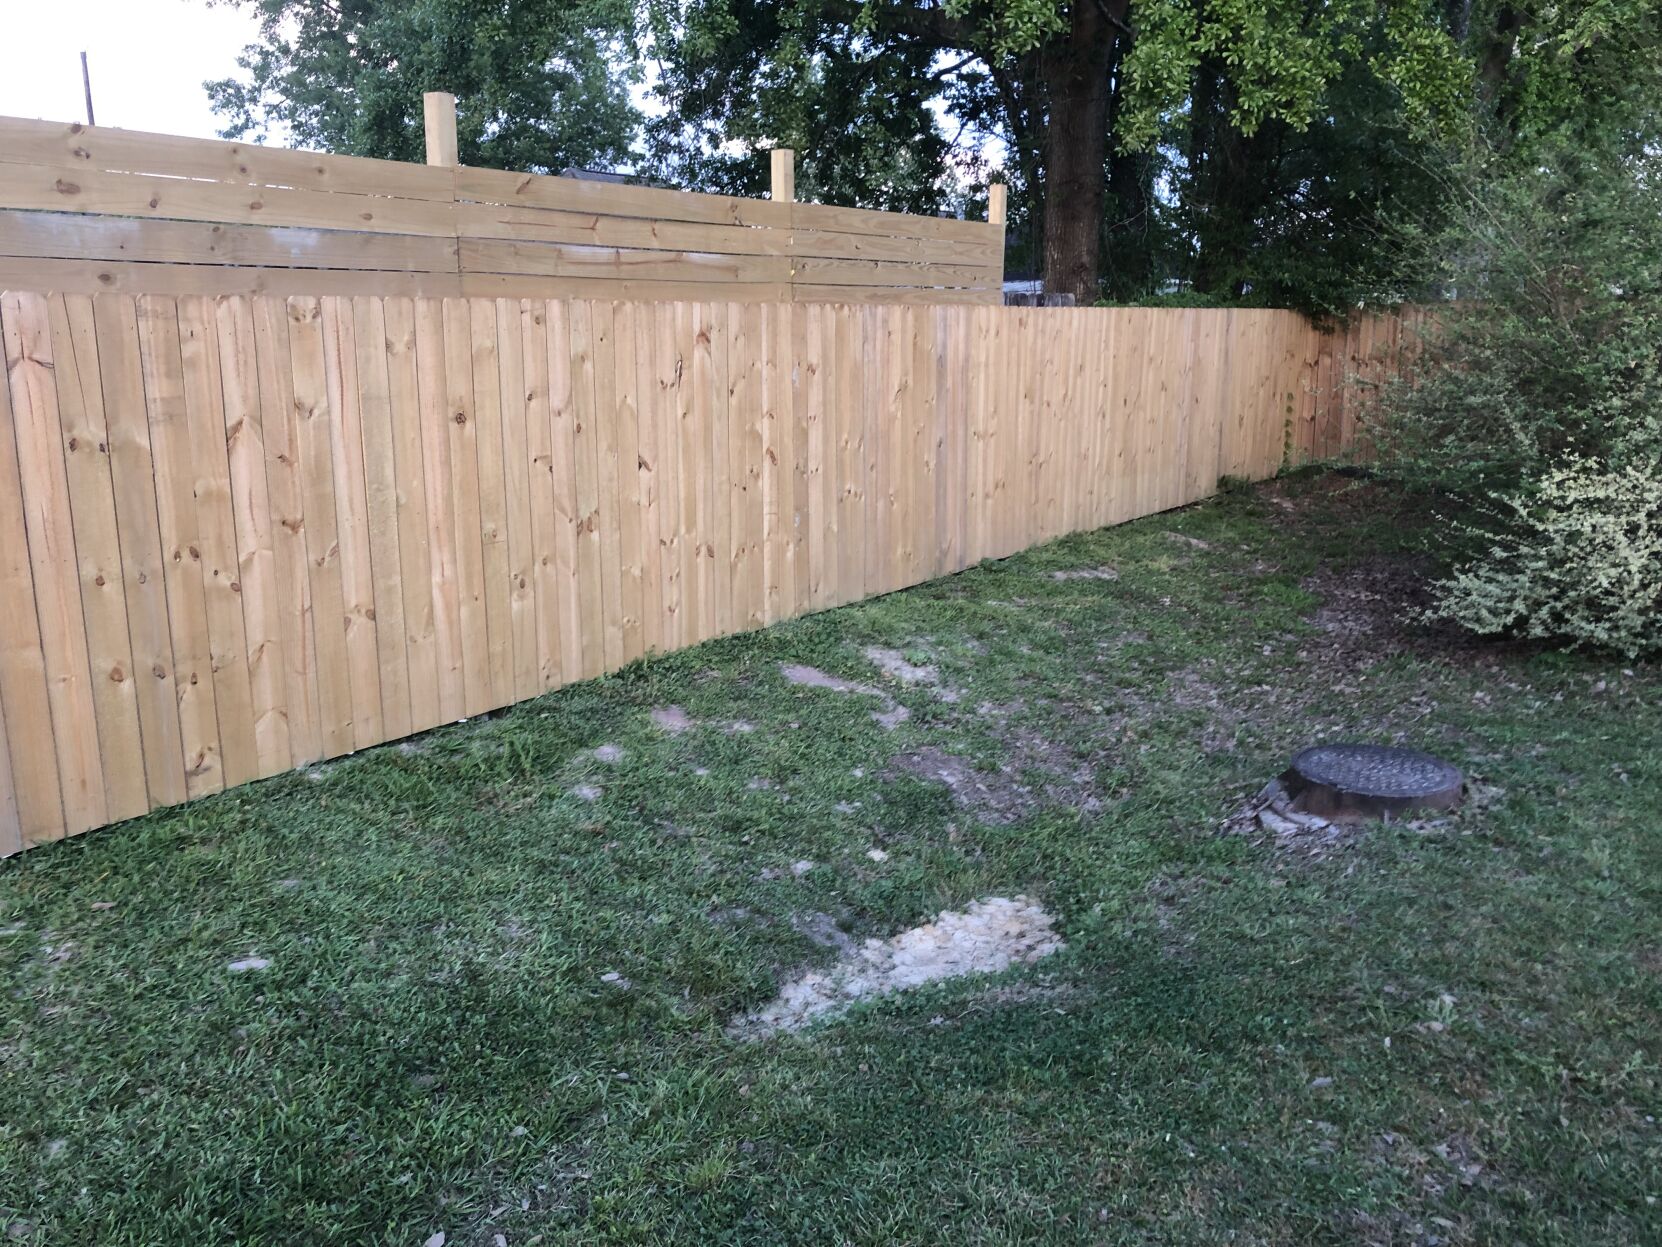 Backyard fence dispute could remake Ascension drainage law News theadvocate